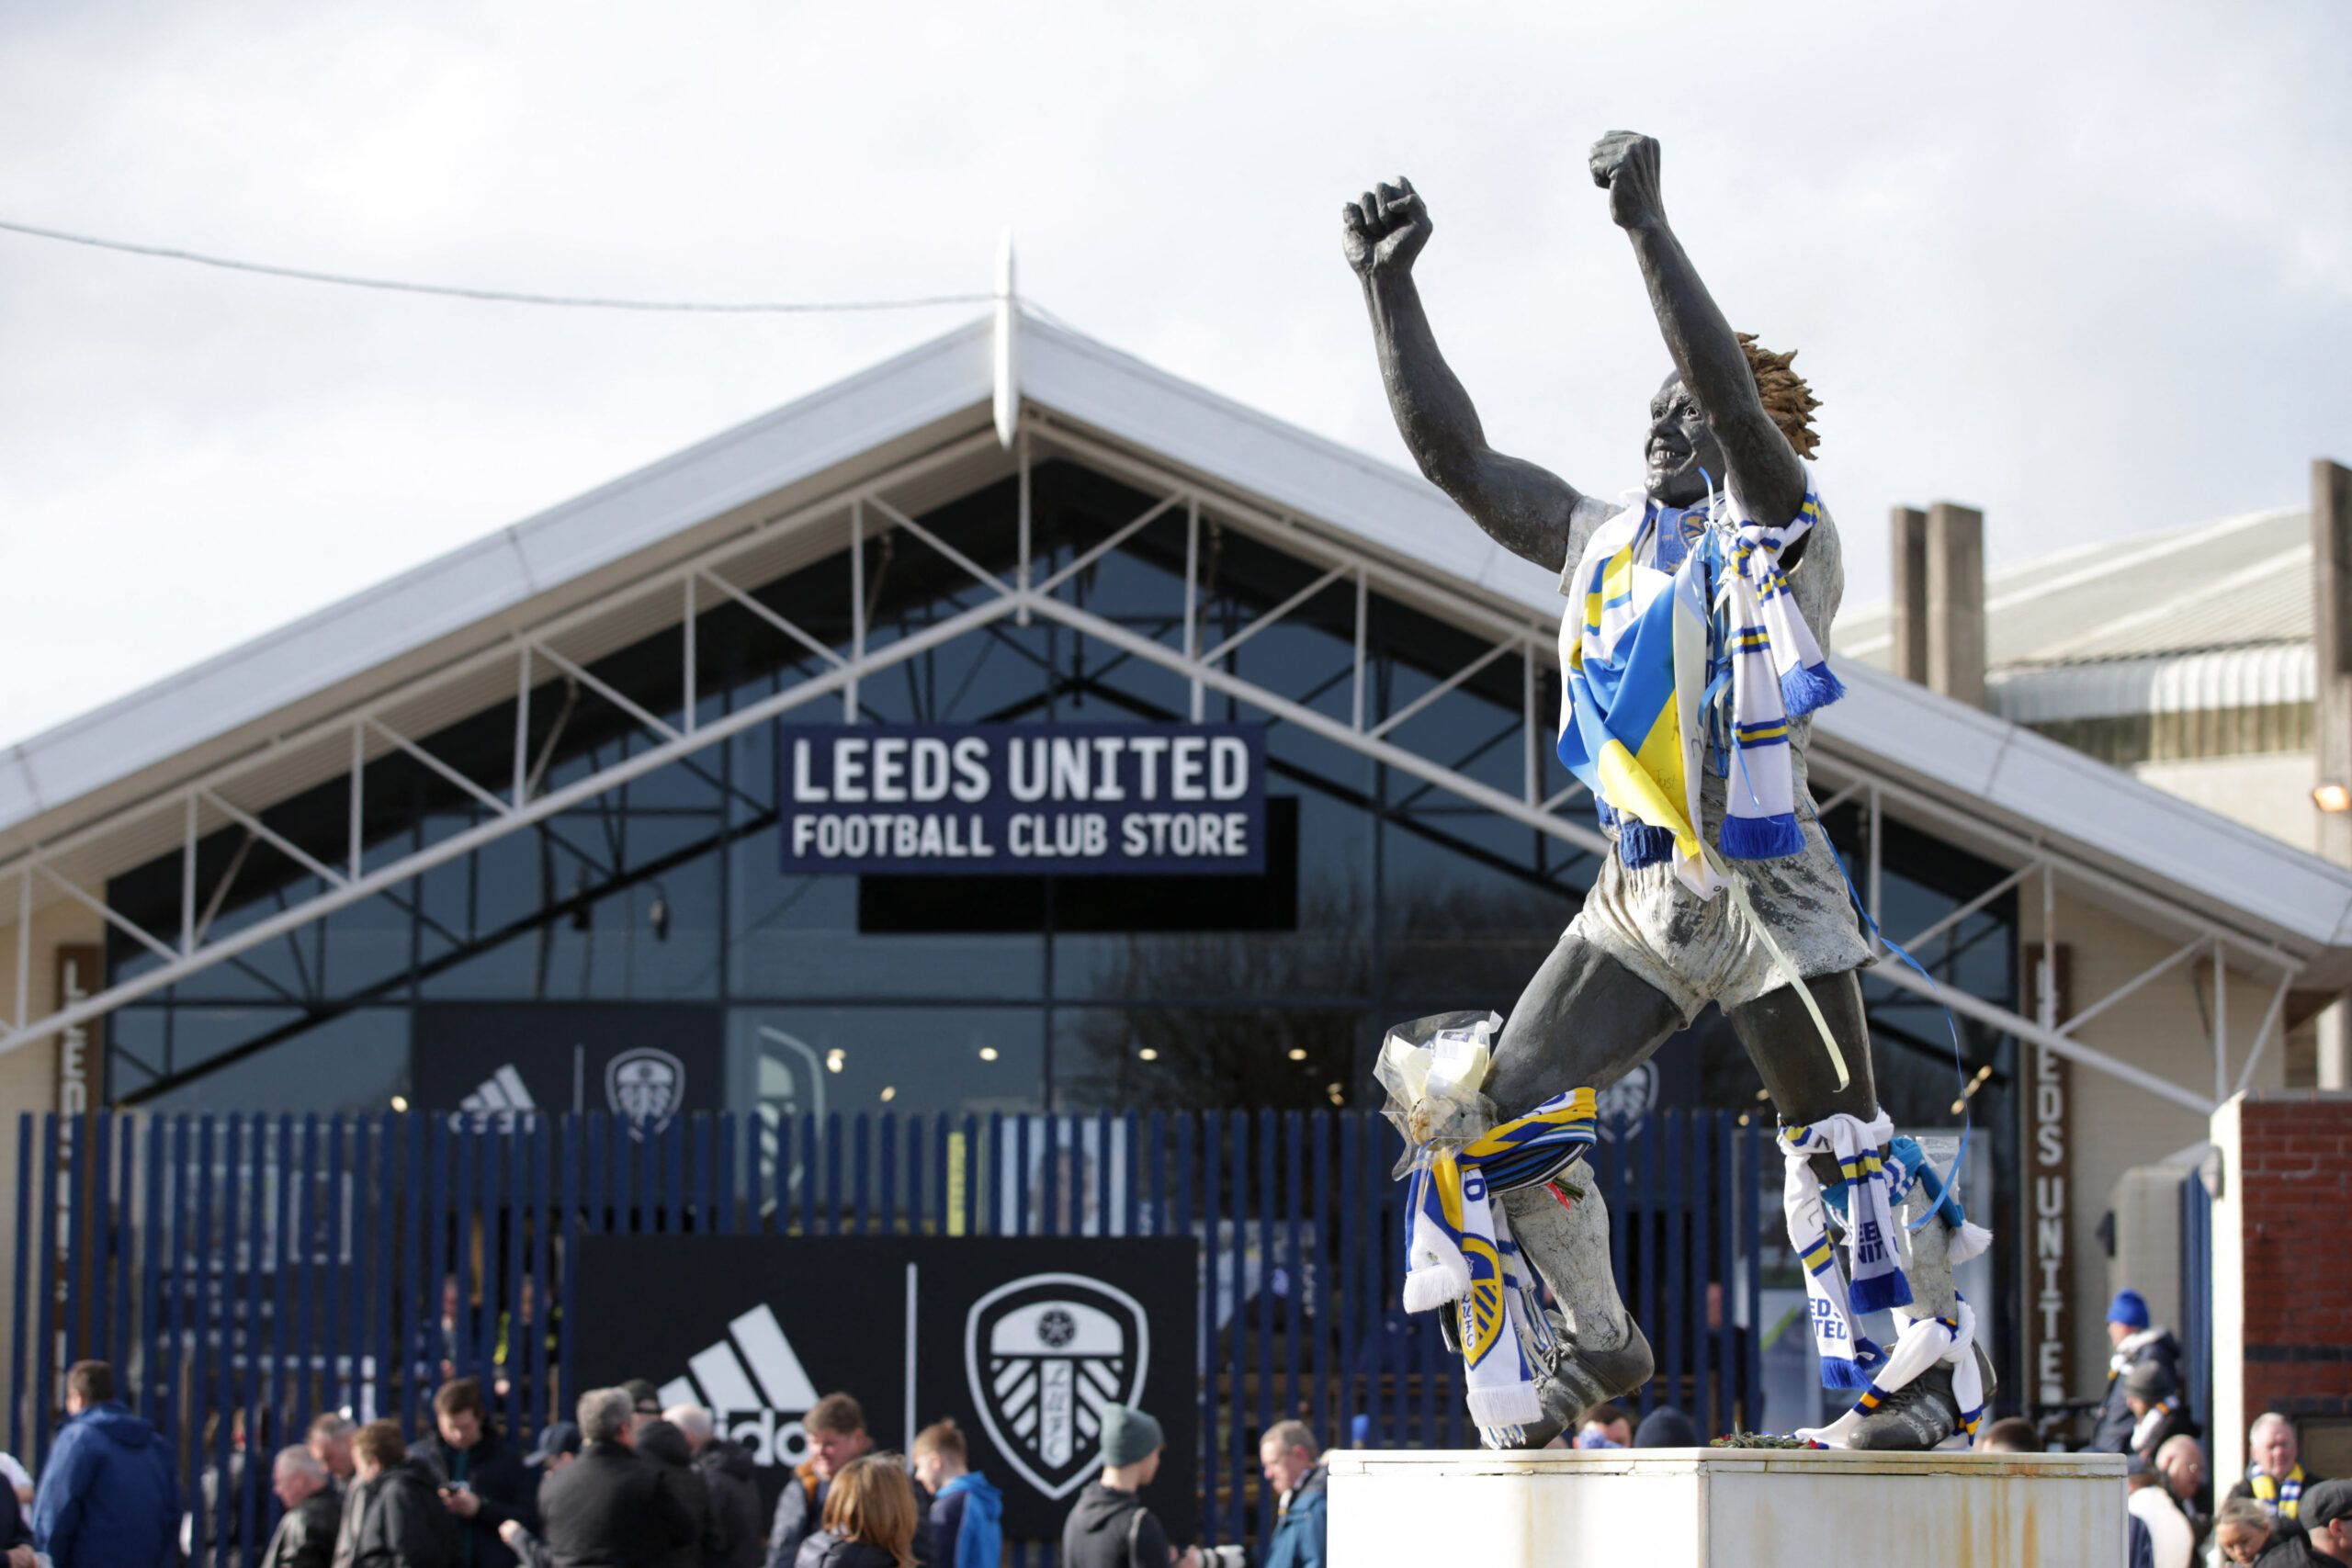 40-year-old manager candidate has ‘connection to Elland Road’